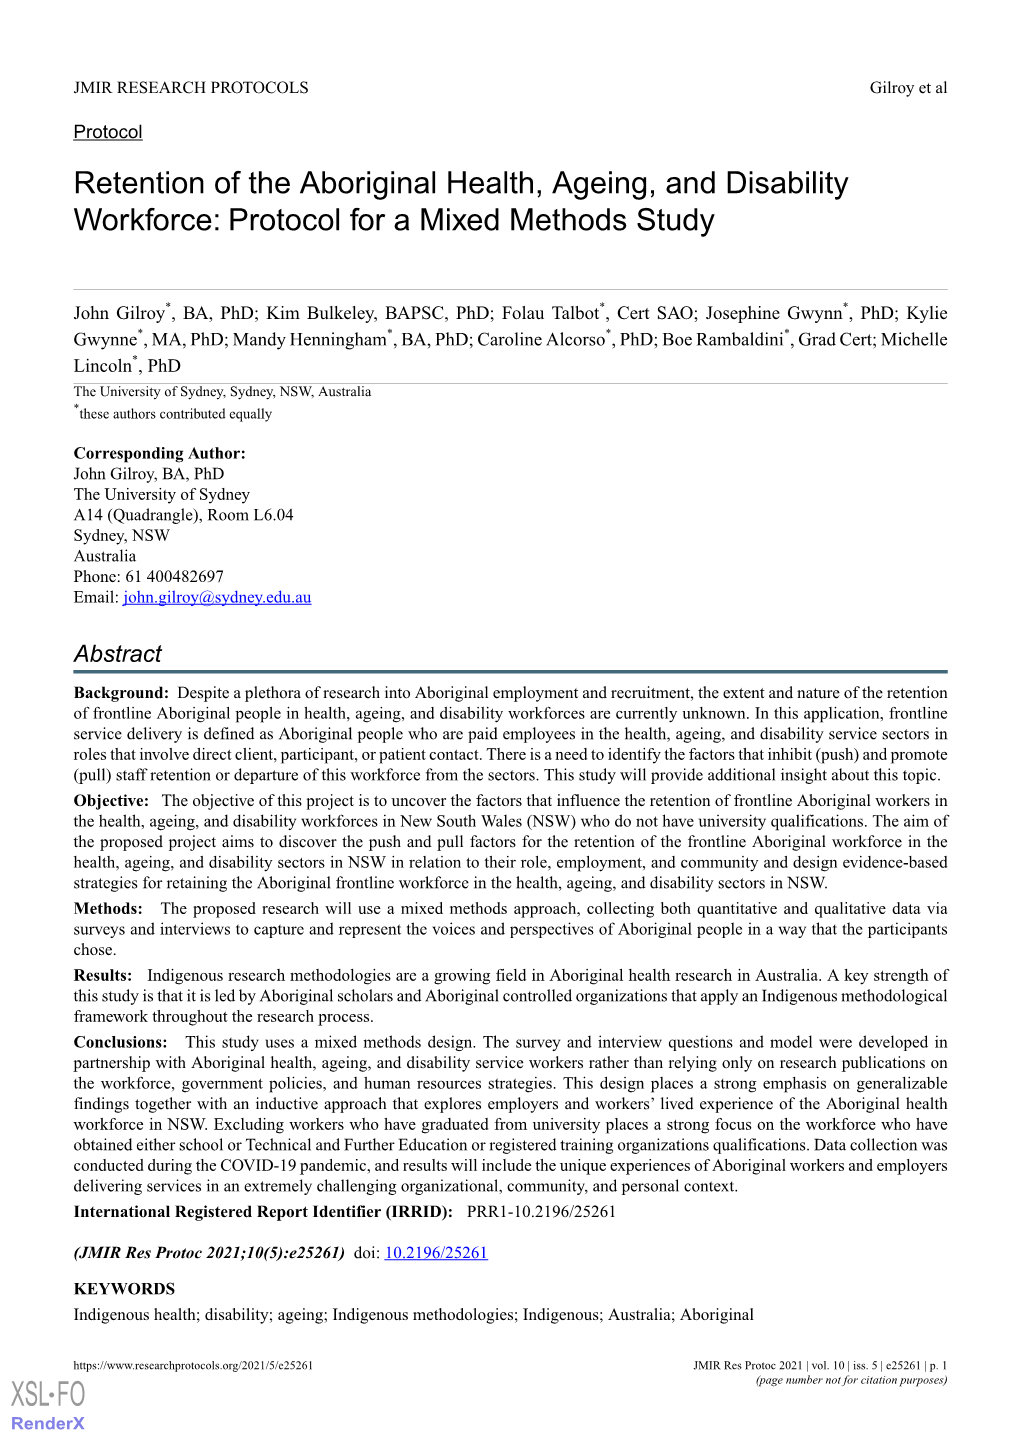 Retention of the Aboriginal Health, Ageing, and Disability Workforce: Protocol for a Mixed Methods Study